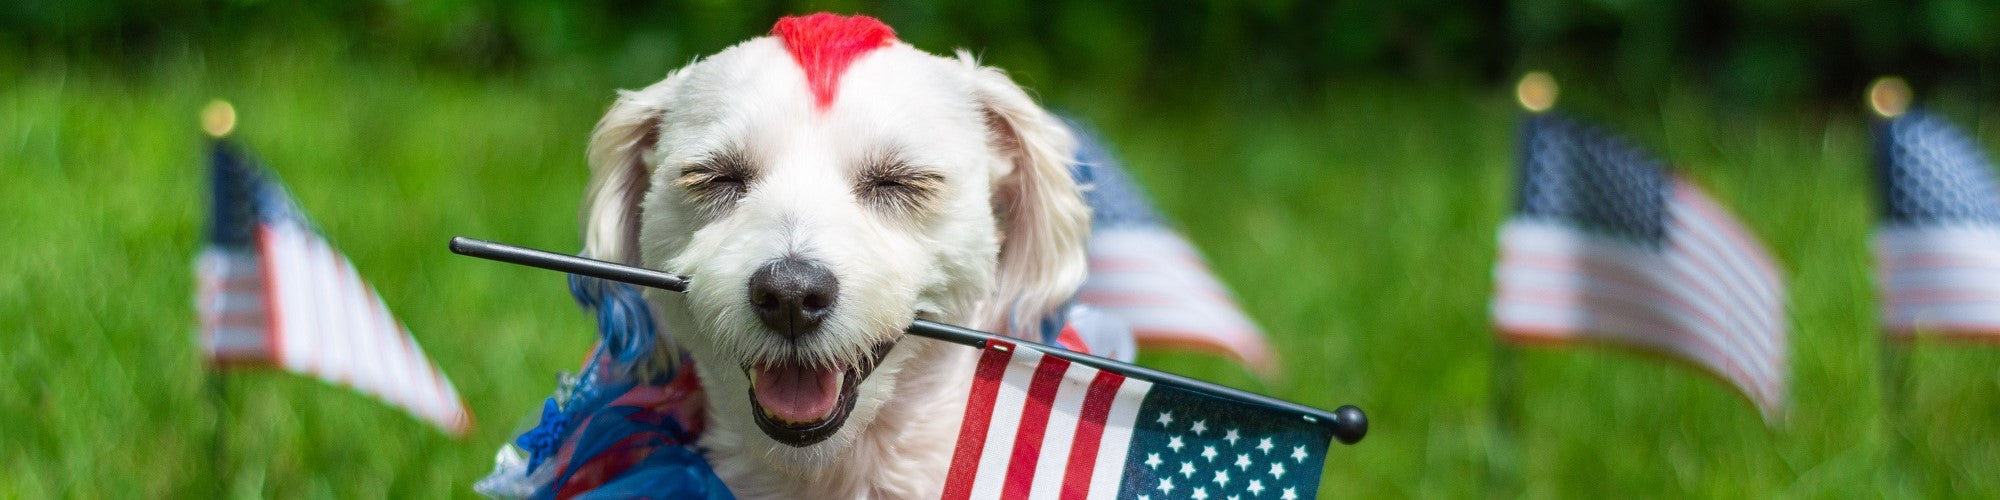 Pet Safety on the 4th of July: 10 Tips to Keep Your Furry Friends Calm and Safe